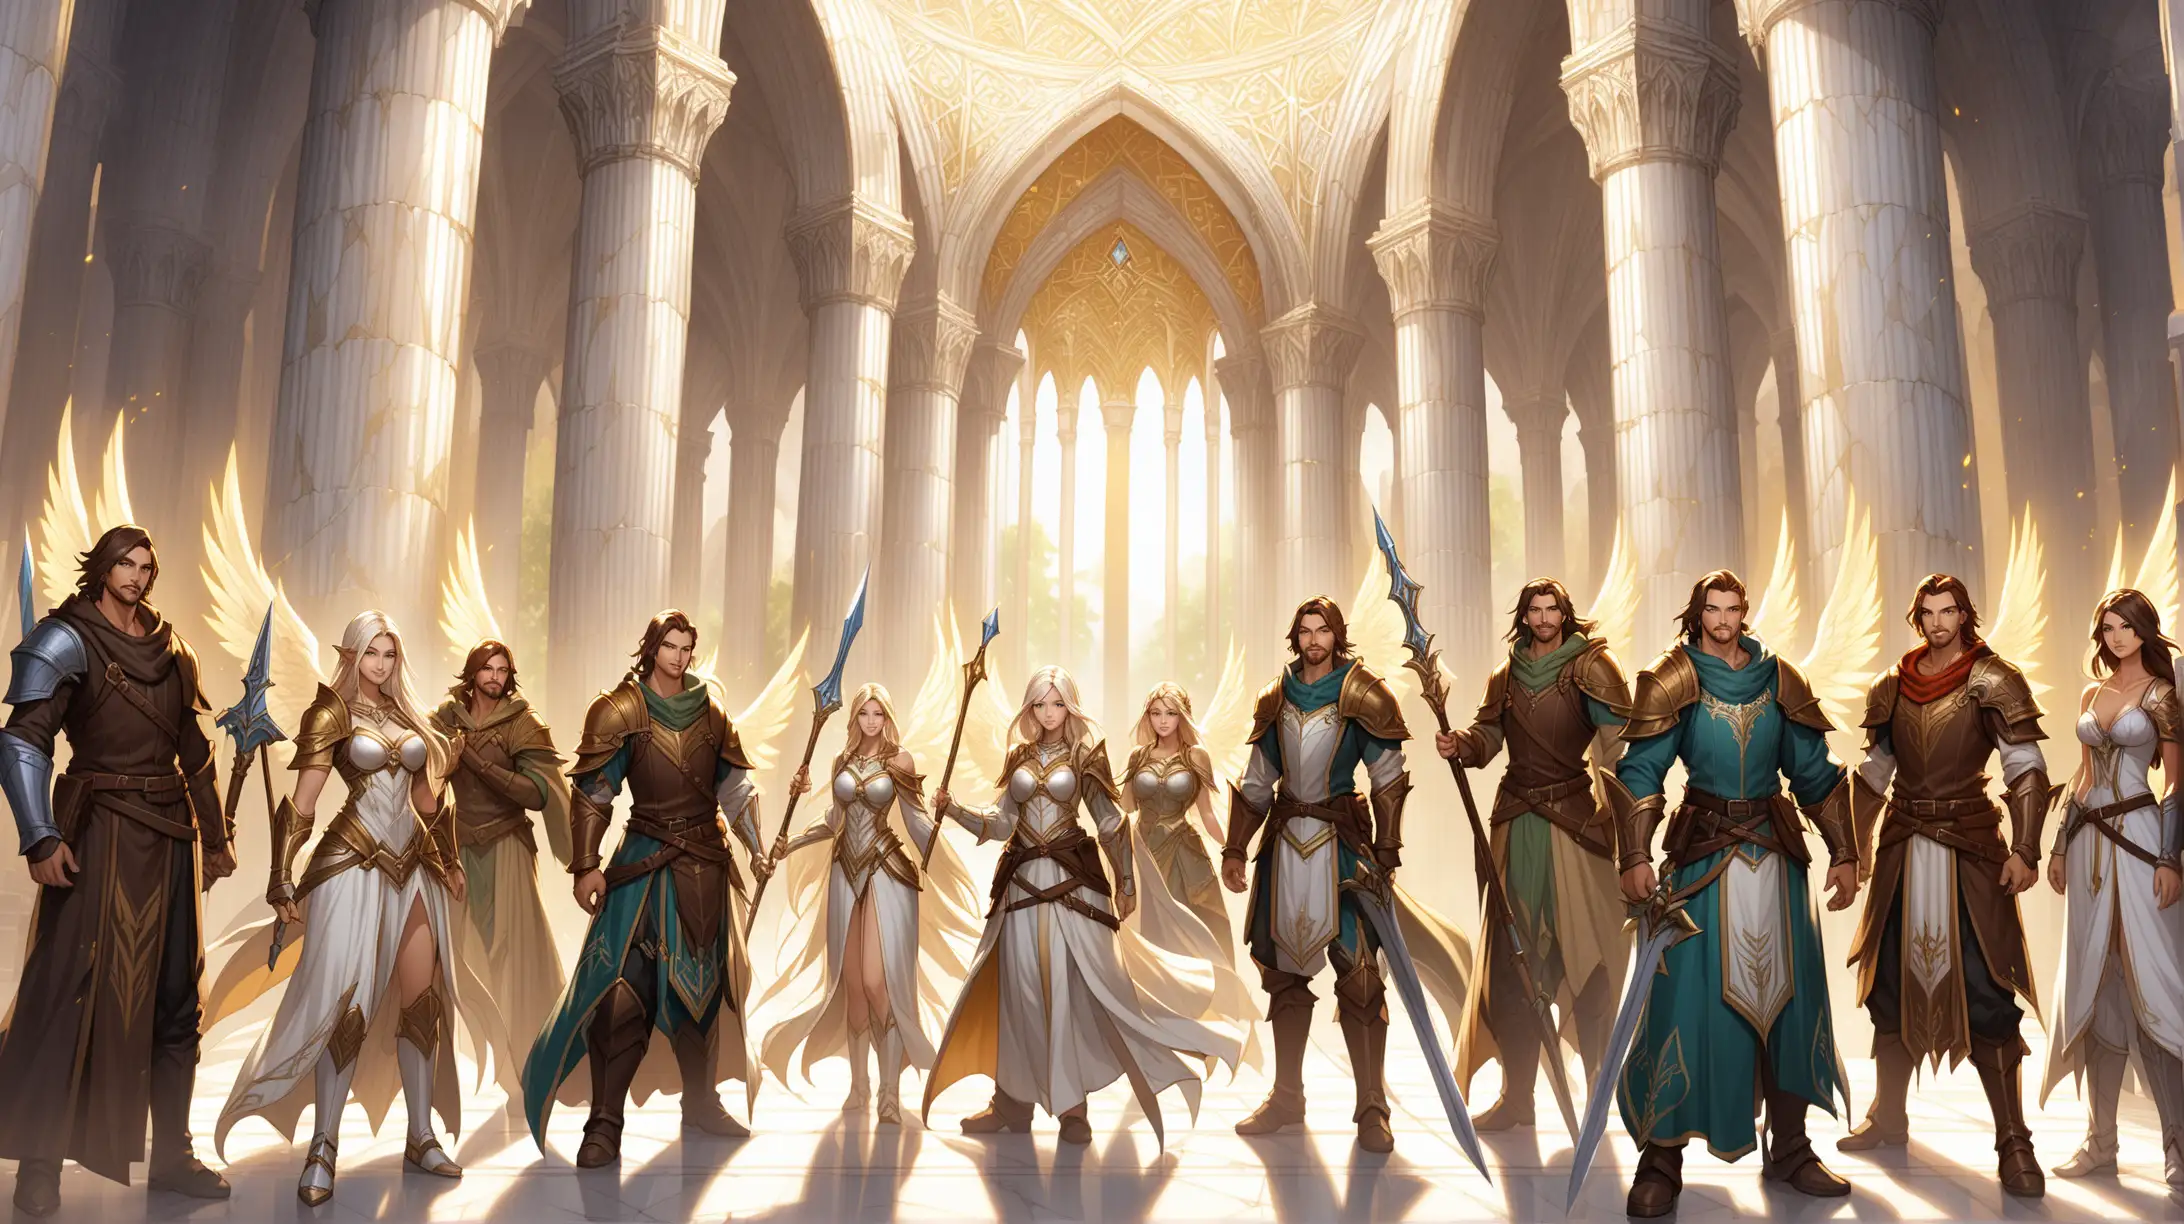 crew of paladins bards and summoners, men and women, half-angels Aasimar, marble palace, Medieval fantasy